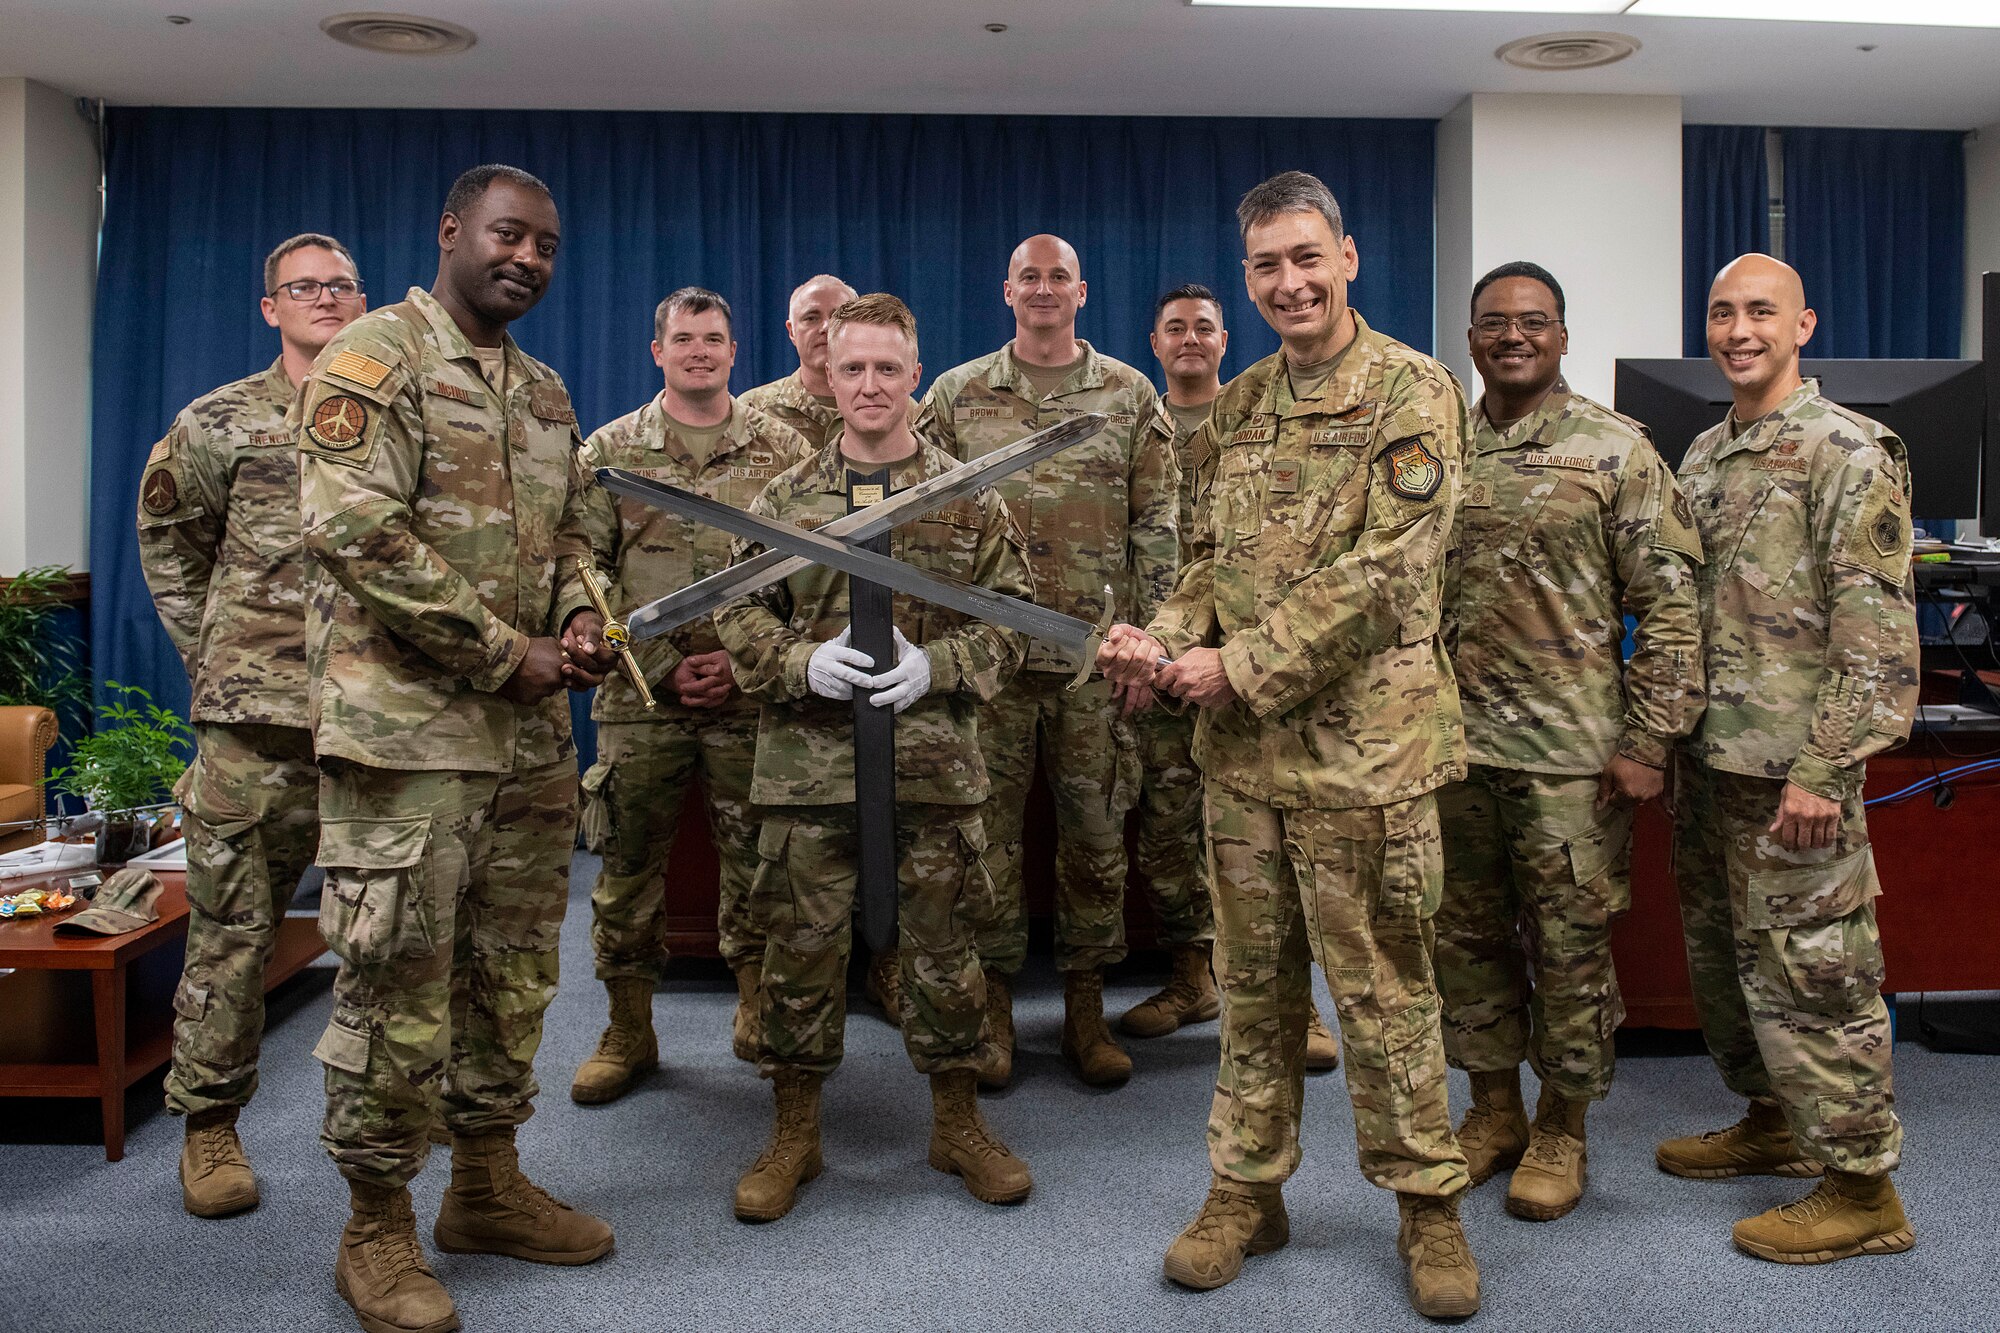 Wing leadership and Airmen from the 374th Airlift Wing stand together with the retired and newly presented Wing Ceremonial Swords